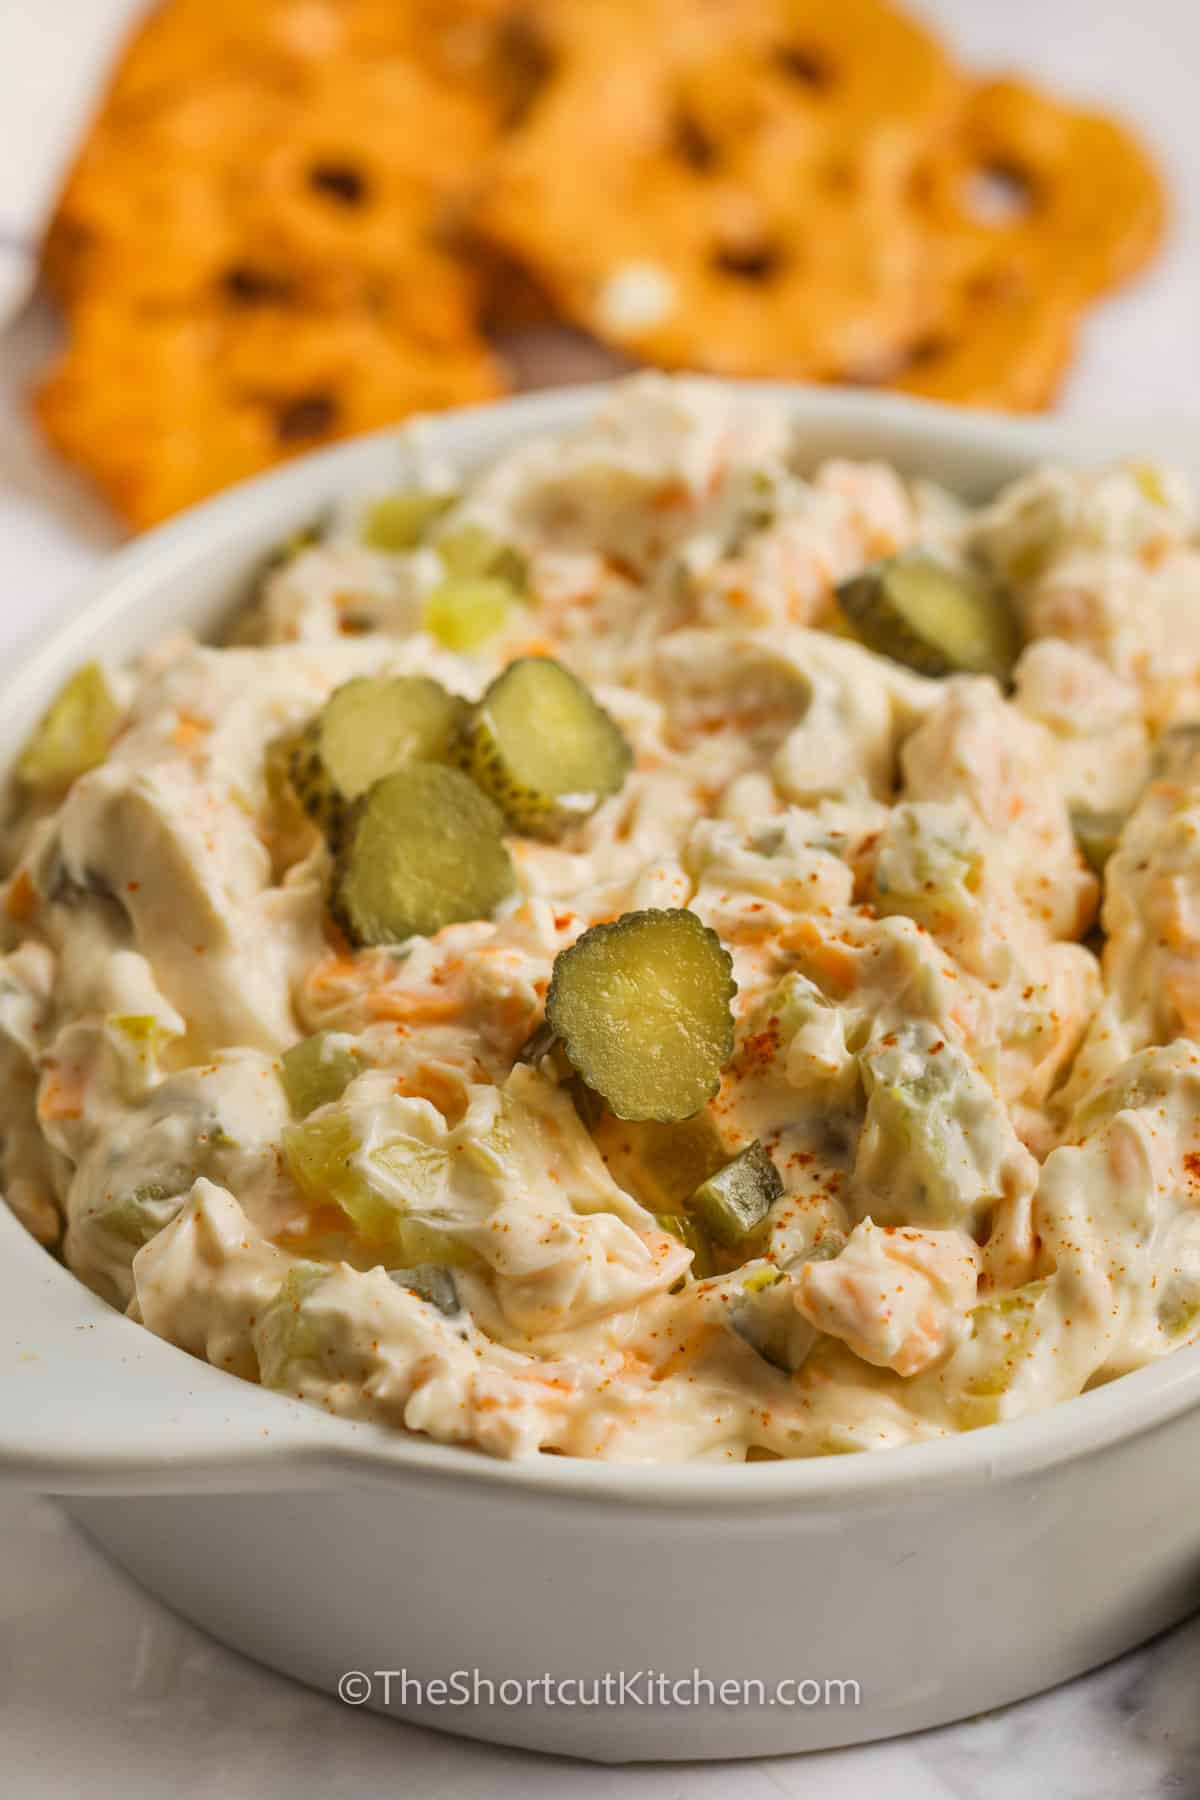 Dill Pickle Dip prepare in a serving dish with sliced pickles on top.